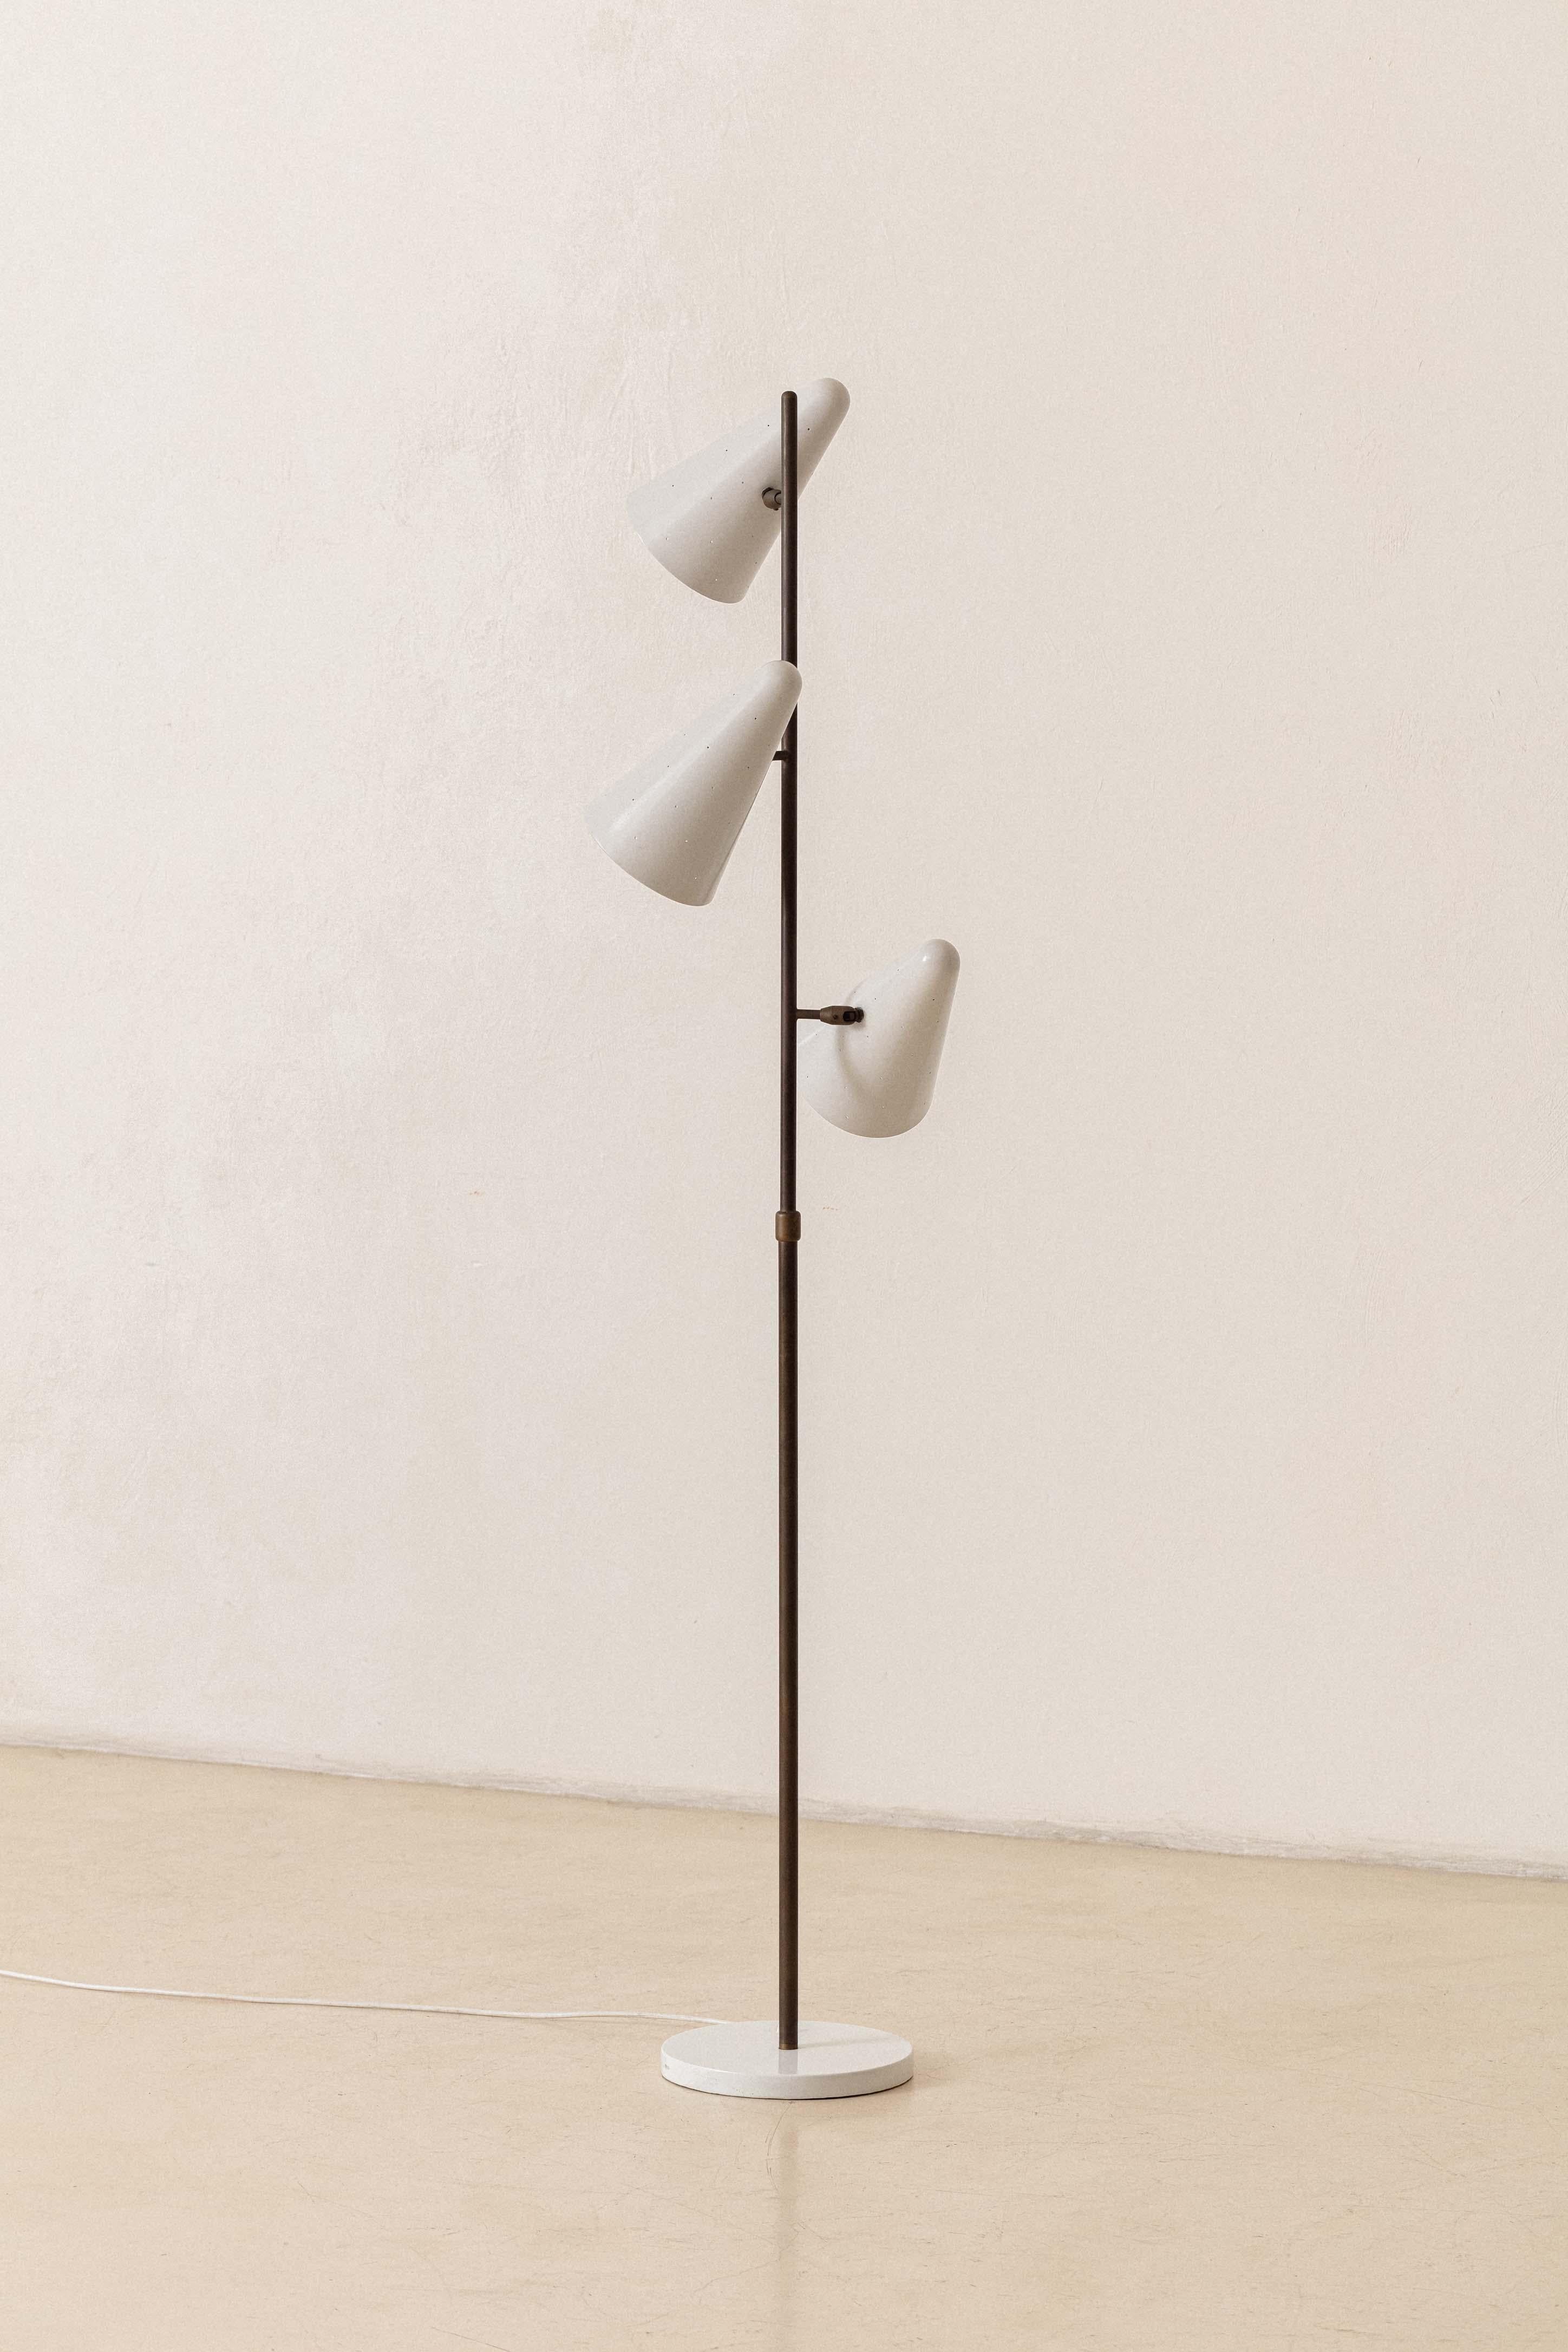 Floor Lamp, Design Attributed to Martin Eisler, Forma S.A., Brazil, 1950s For Sale 1